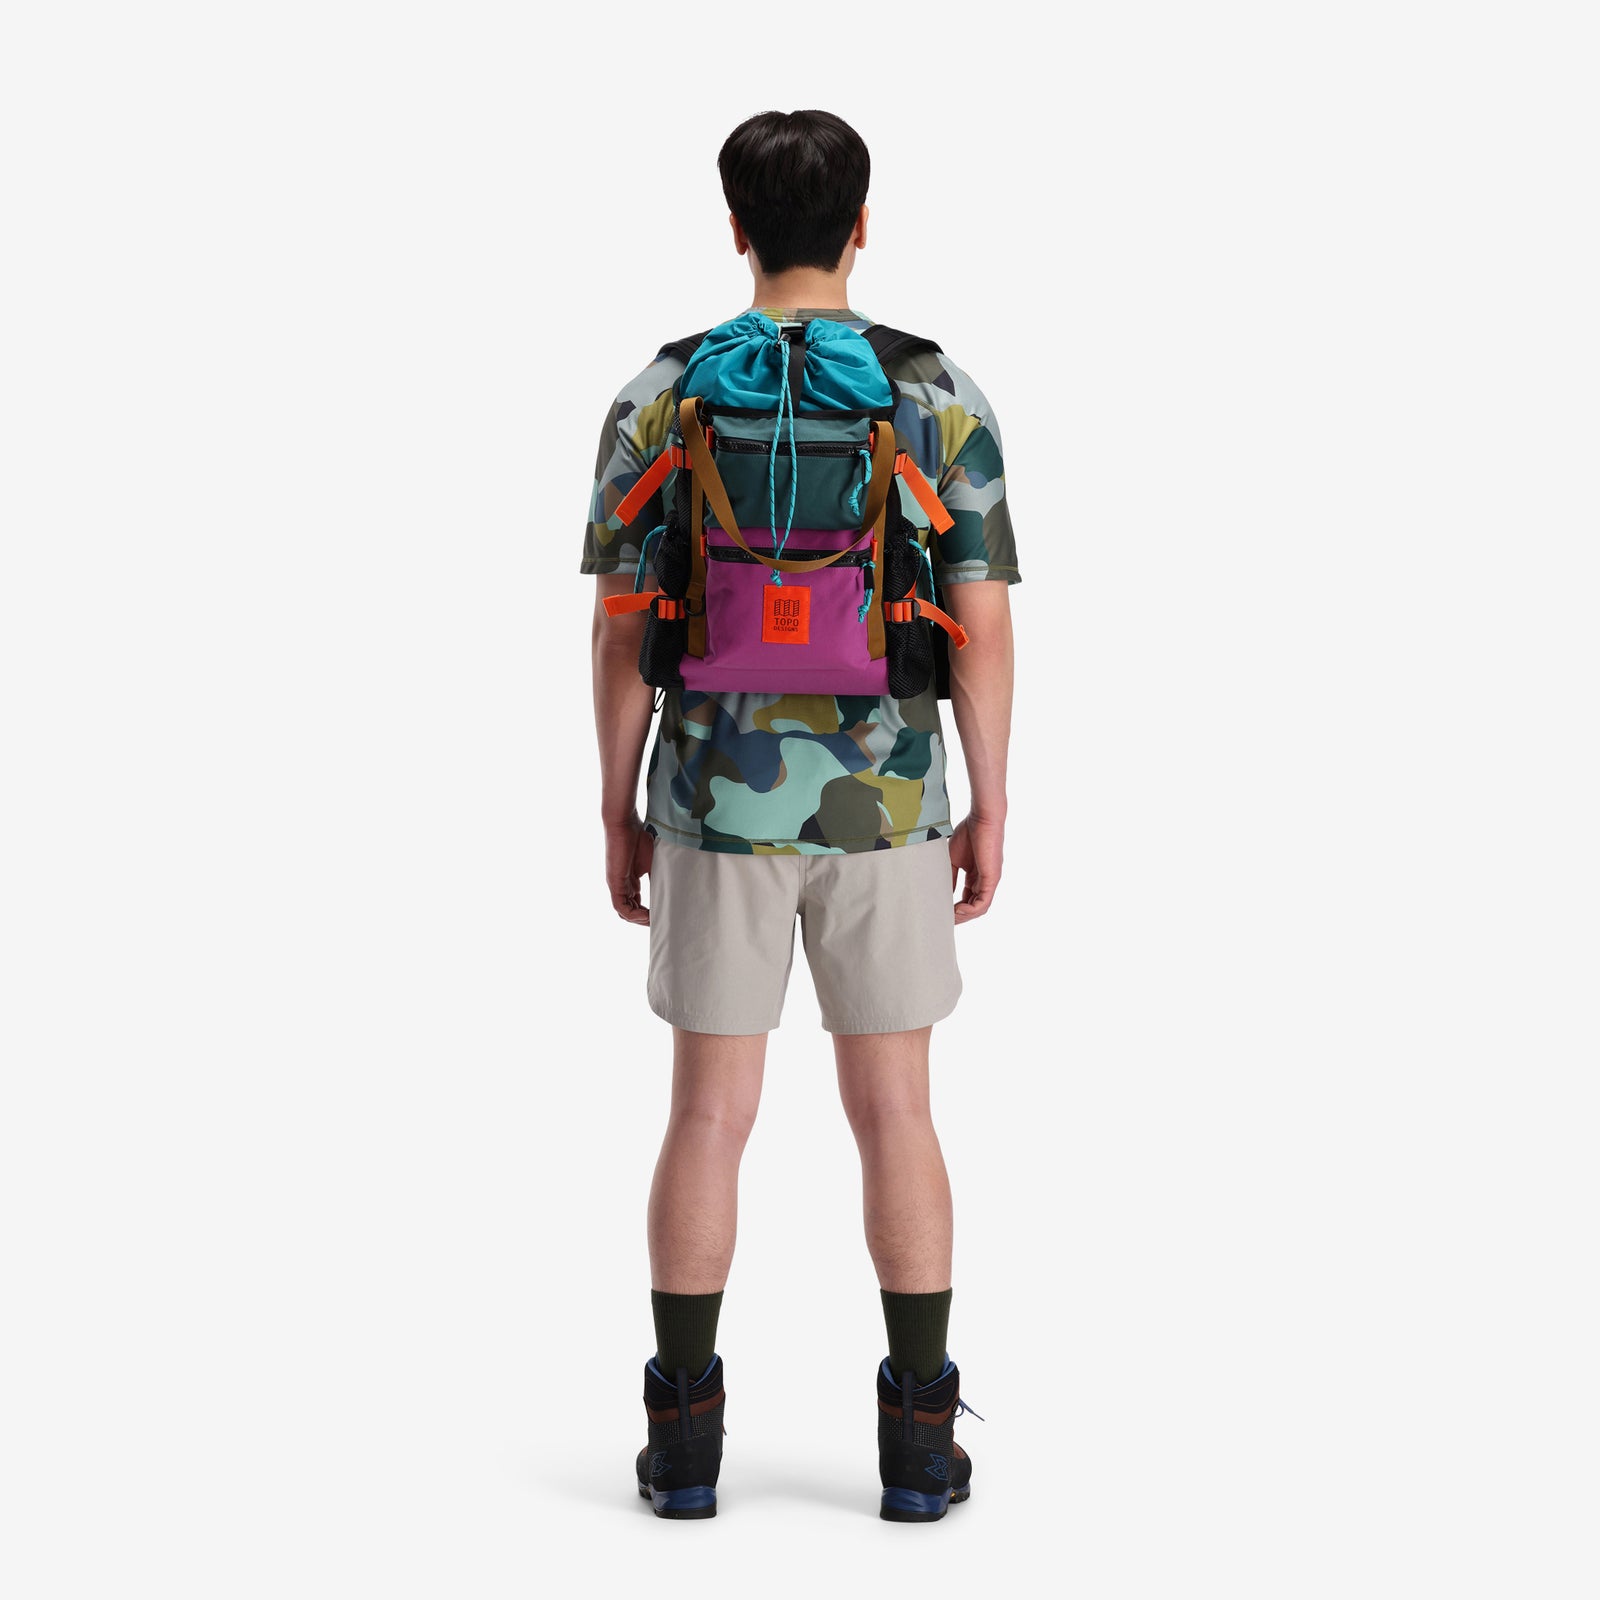 Back view of model wearing the Topo Designs River Bag cinch top tote backpack with mesh sides in "Botanic Green / Grape" green recycled nylon.